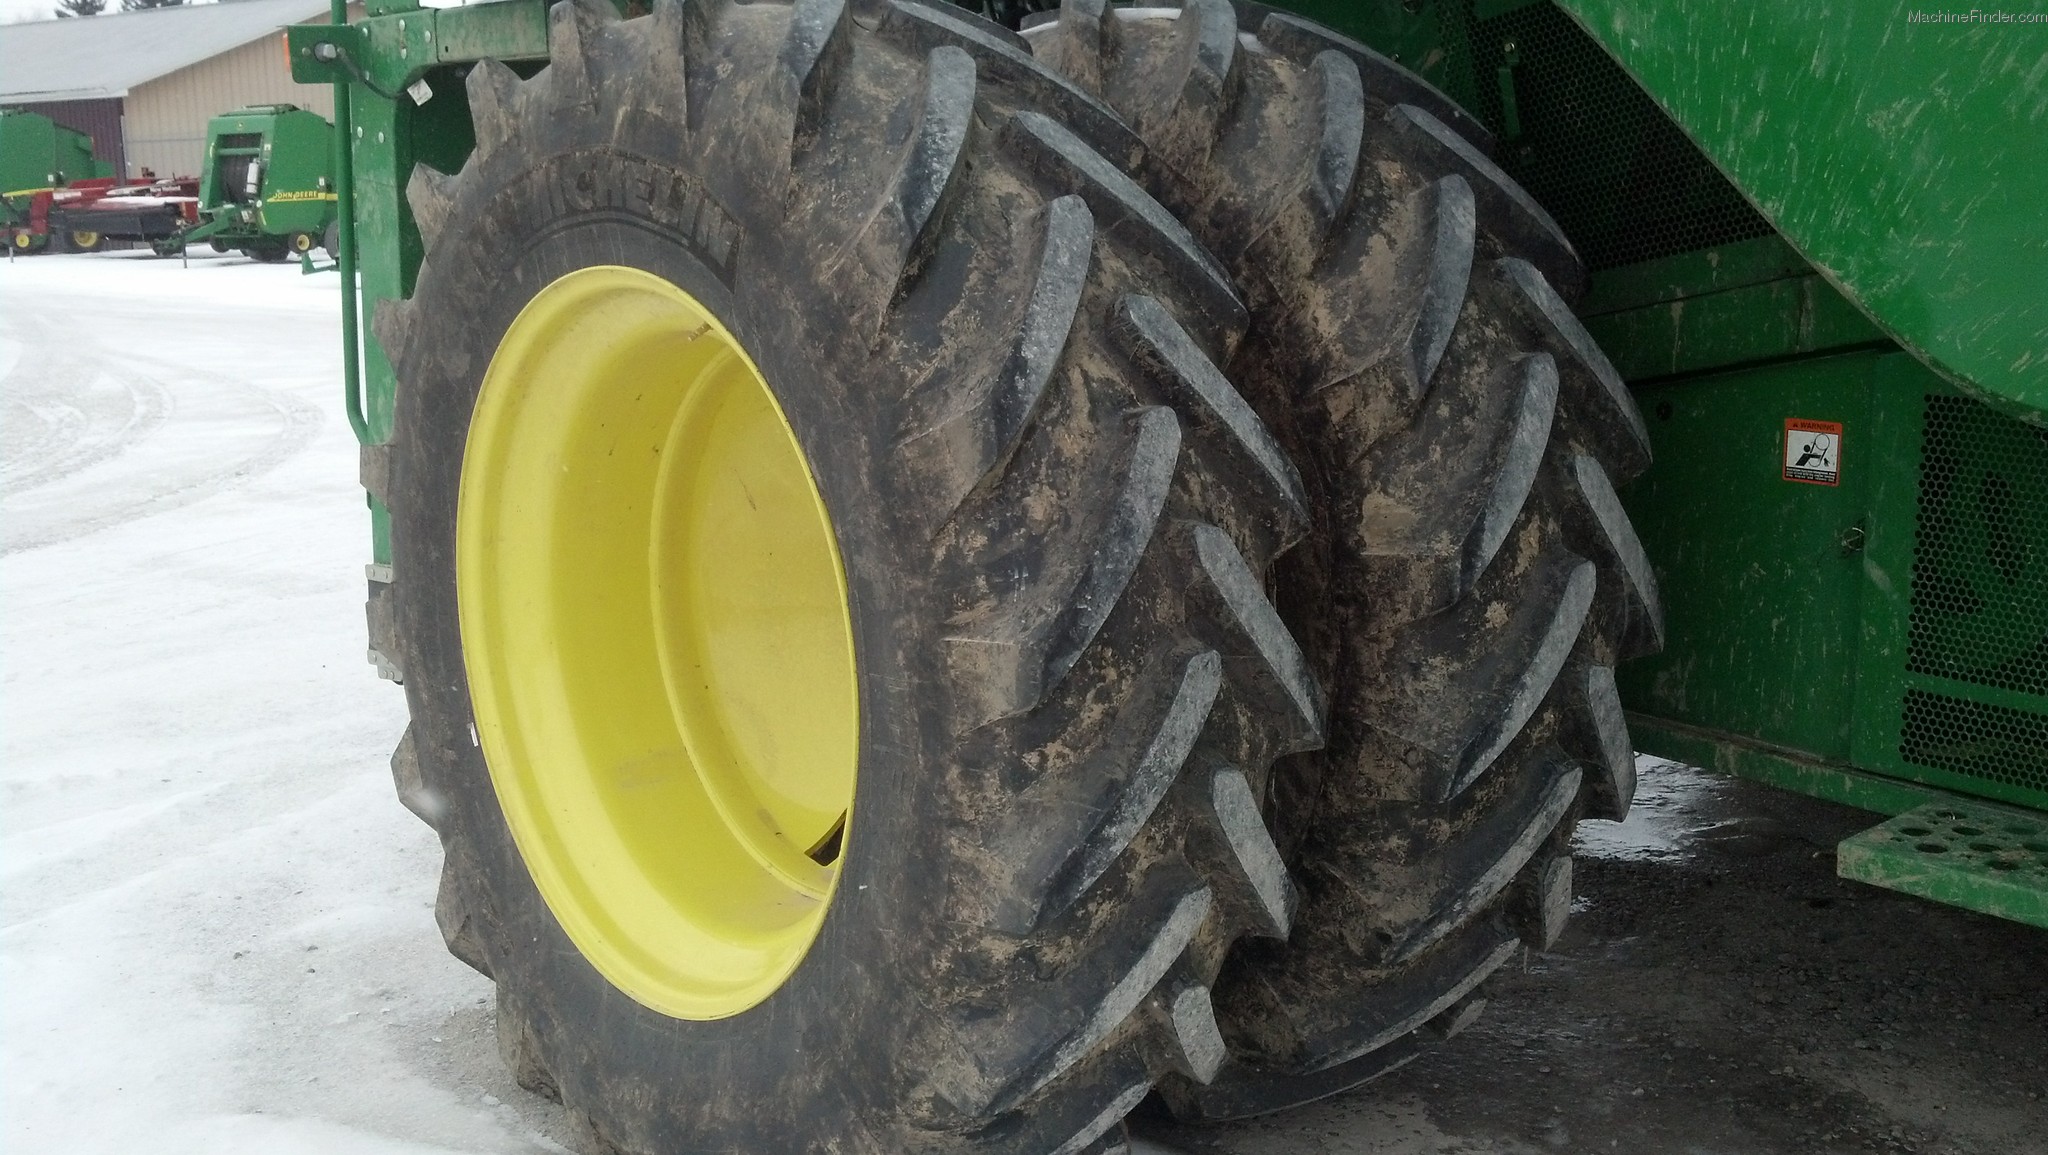 Michelin 520/85R42 Wheels, Tires, and Attachments - John ...